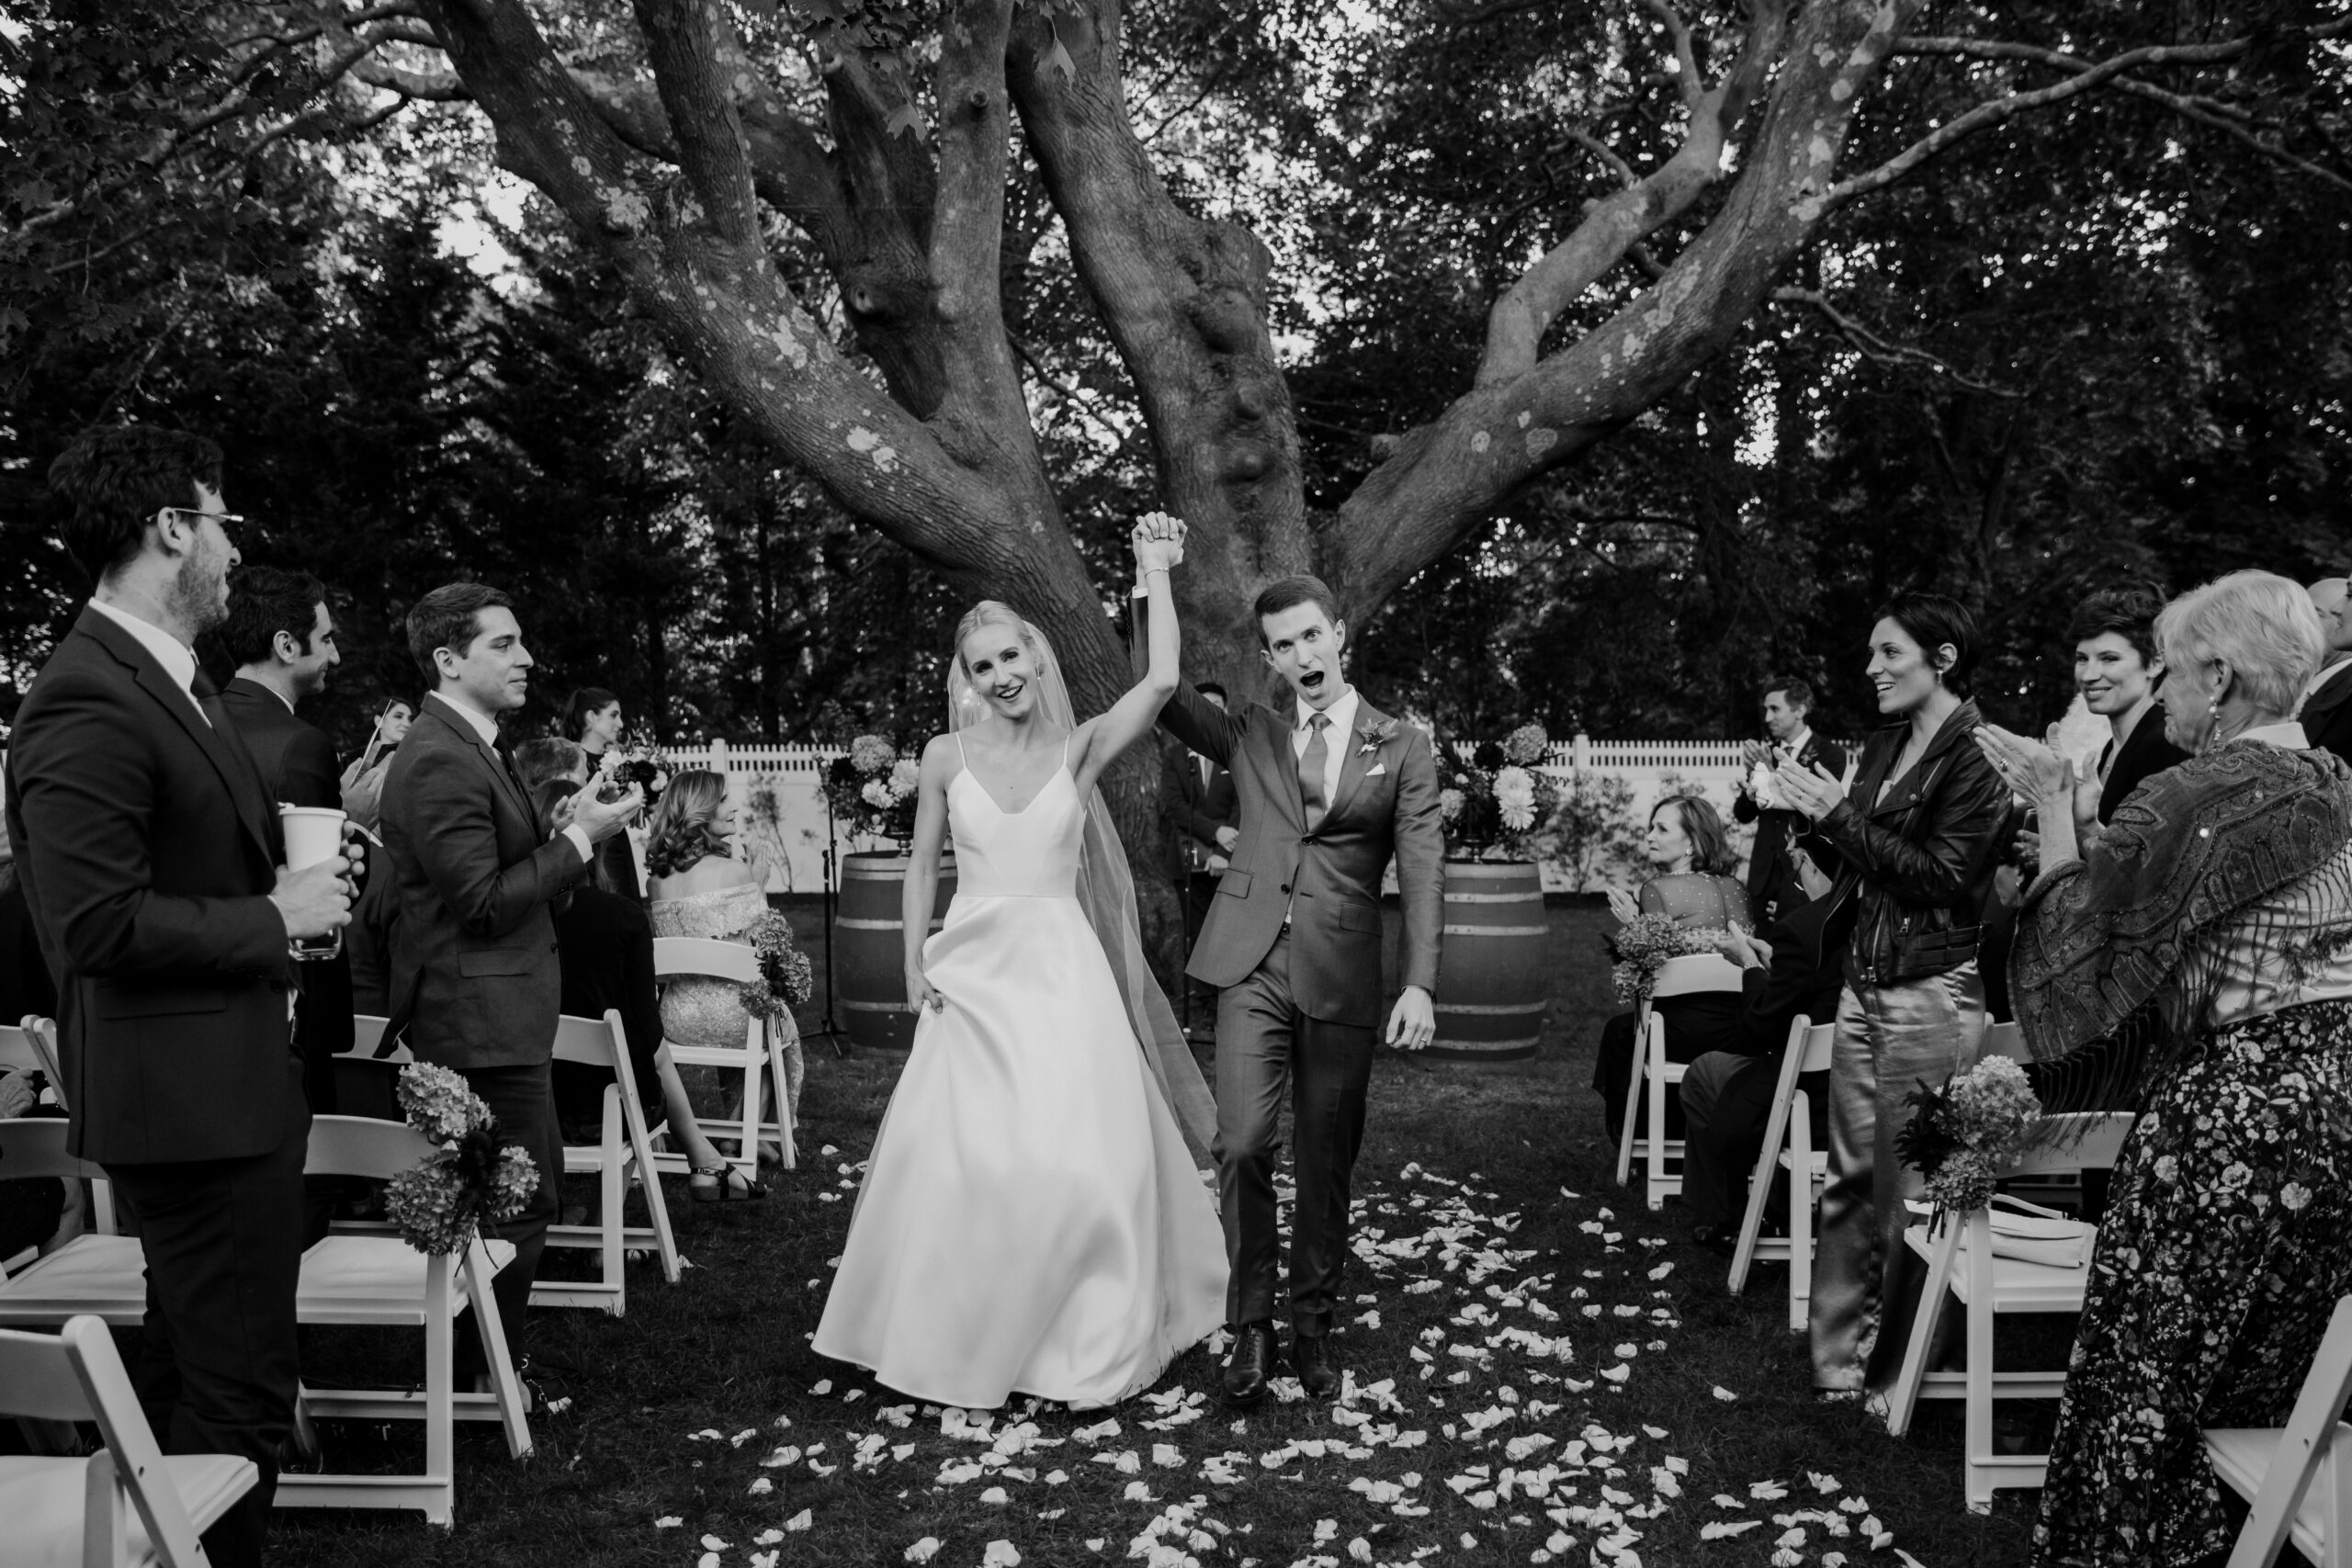 The wedding ceremony under a magnificent tree at Bedell Cellars